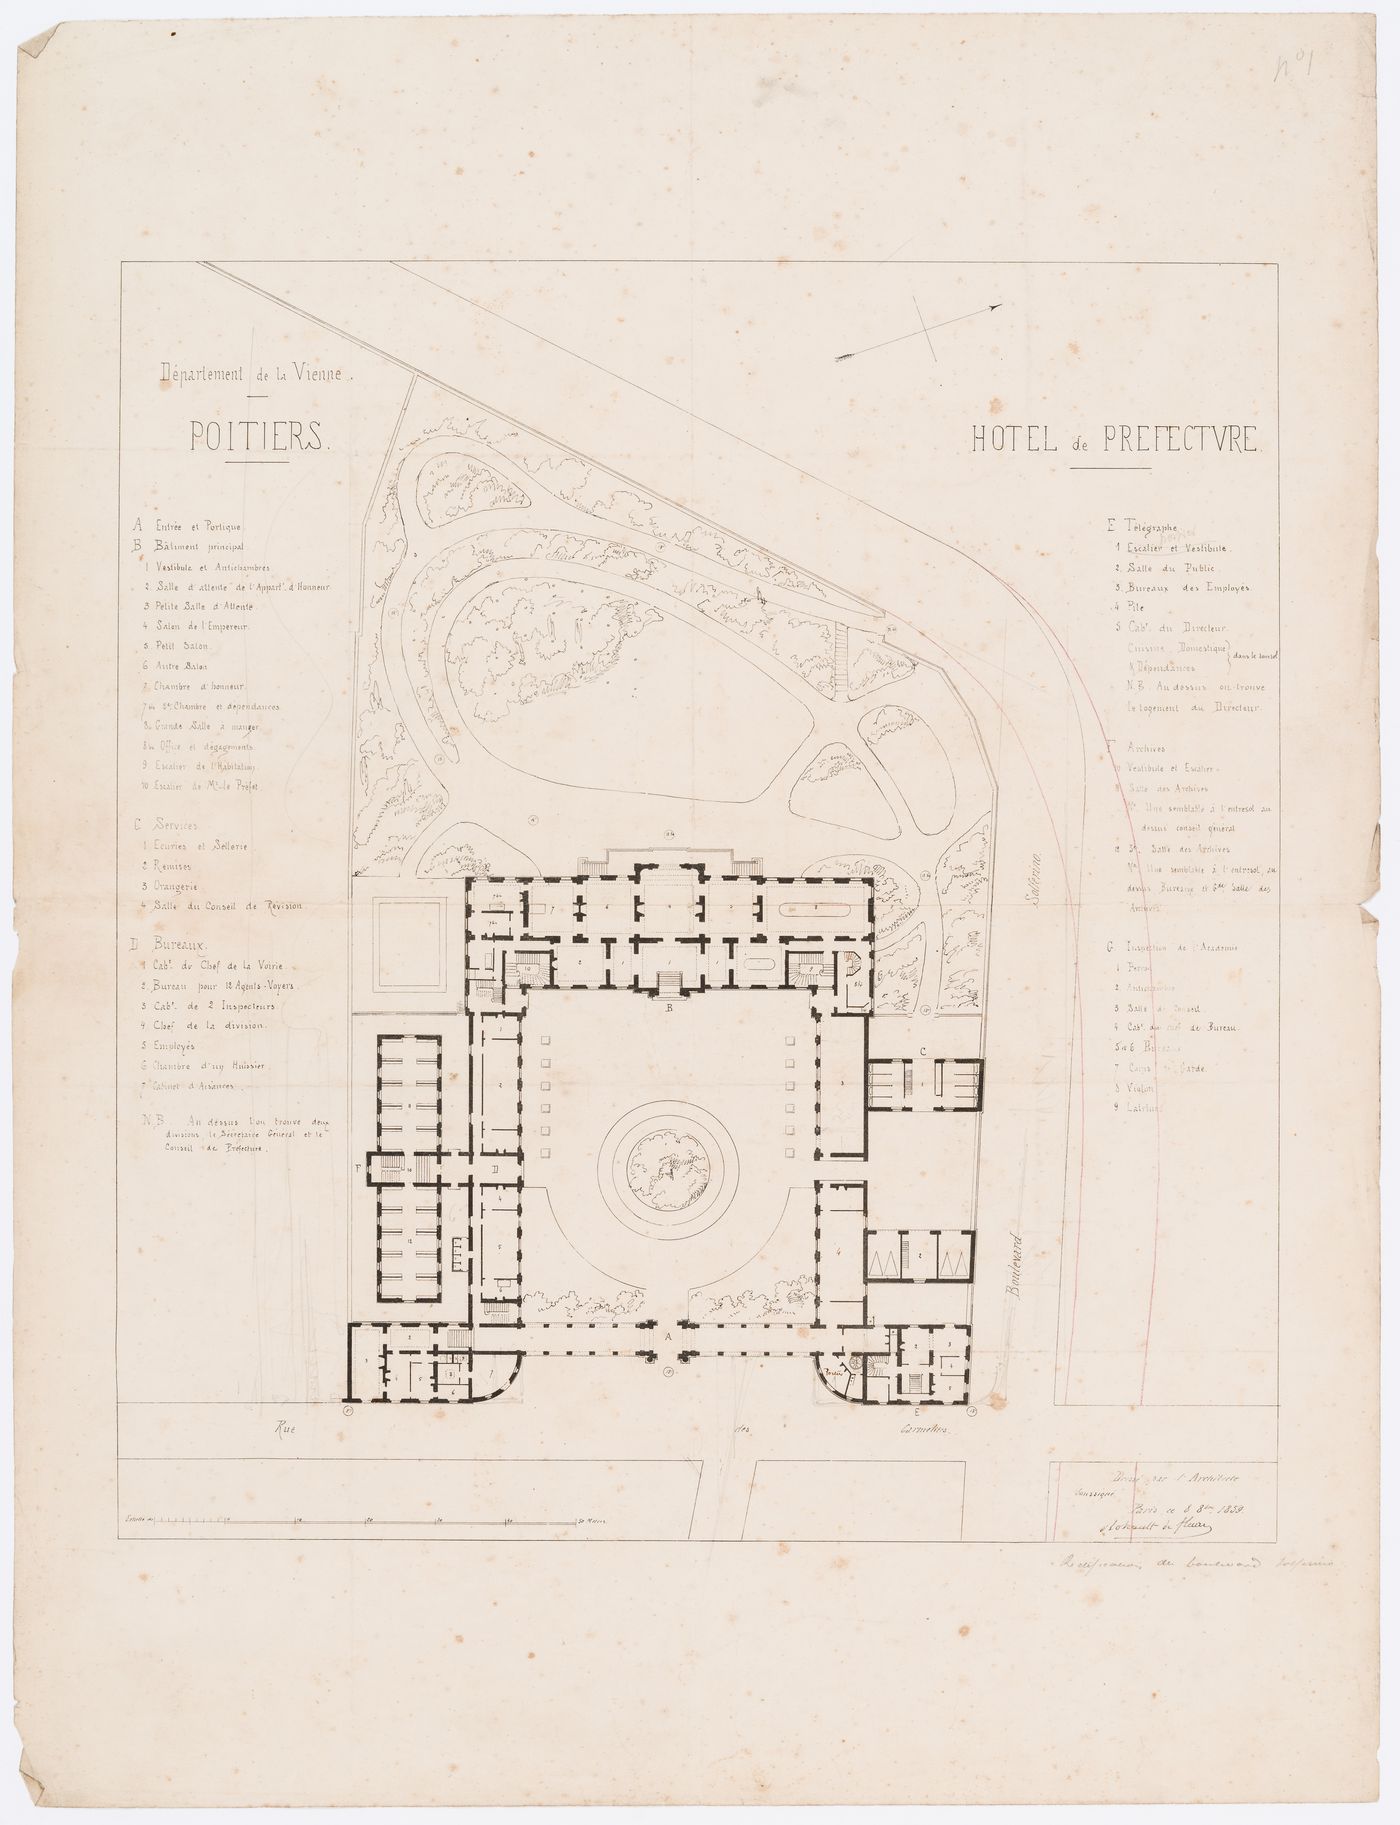 Project for a Hôtel de préfecture, Poitiers: Site plan with a key to the layout of rooms